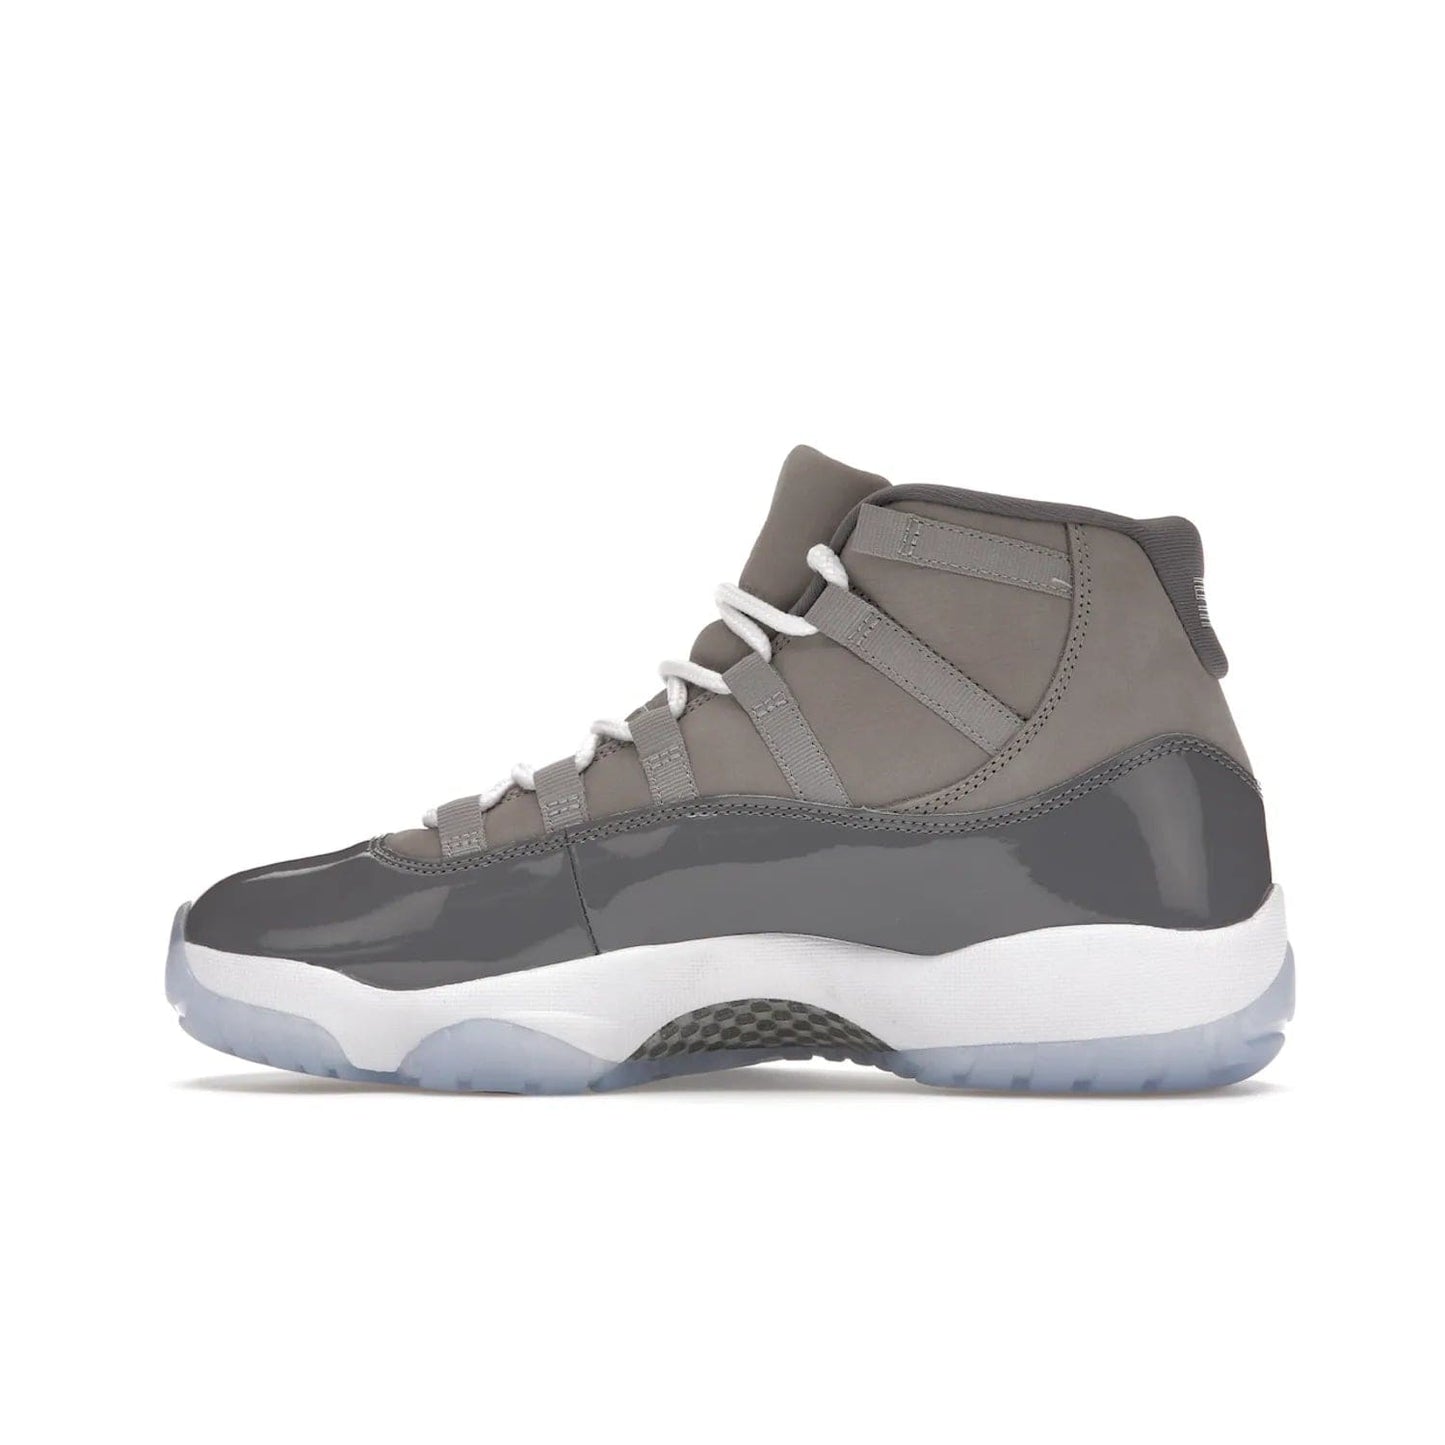 Jordan 11 Retro Cool Grey (2021) - Image 20 - Only at www.BallersClubKickz.com - Shop the Air Jordan 11 Retro Cool Grey (2021) for a must-have sneaker with a Cool Grey Durabuck upper, patent leather overlays, signature Jumpman embroidery, a white midsole, icy blue translucent outsole, and Multi-Color accents.  Released in December 2021 for $225.